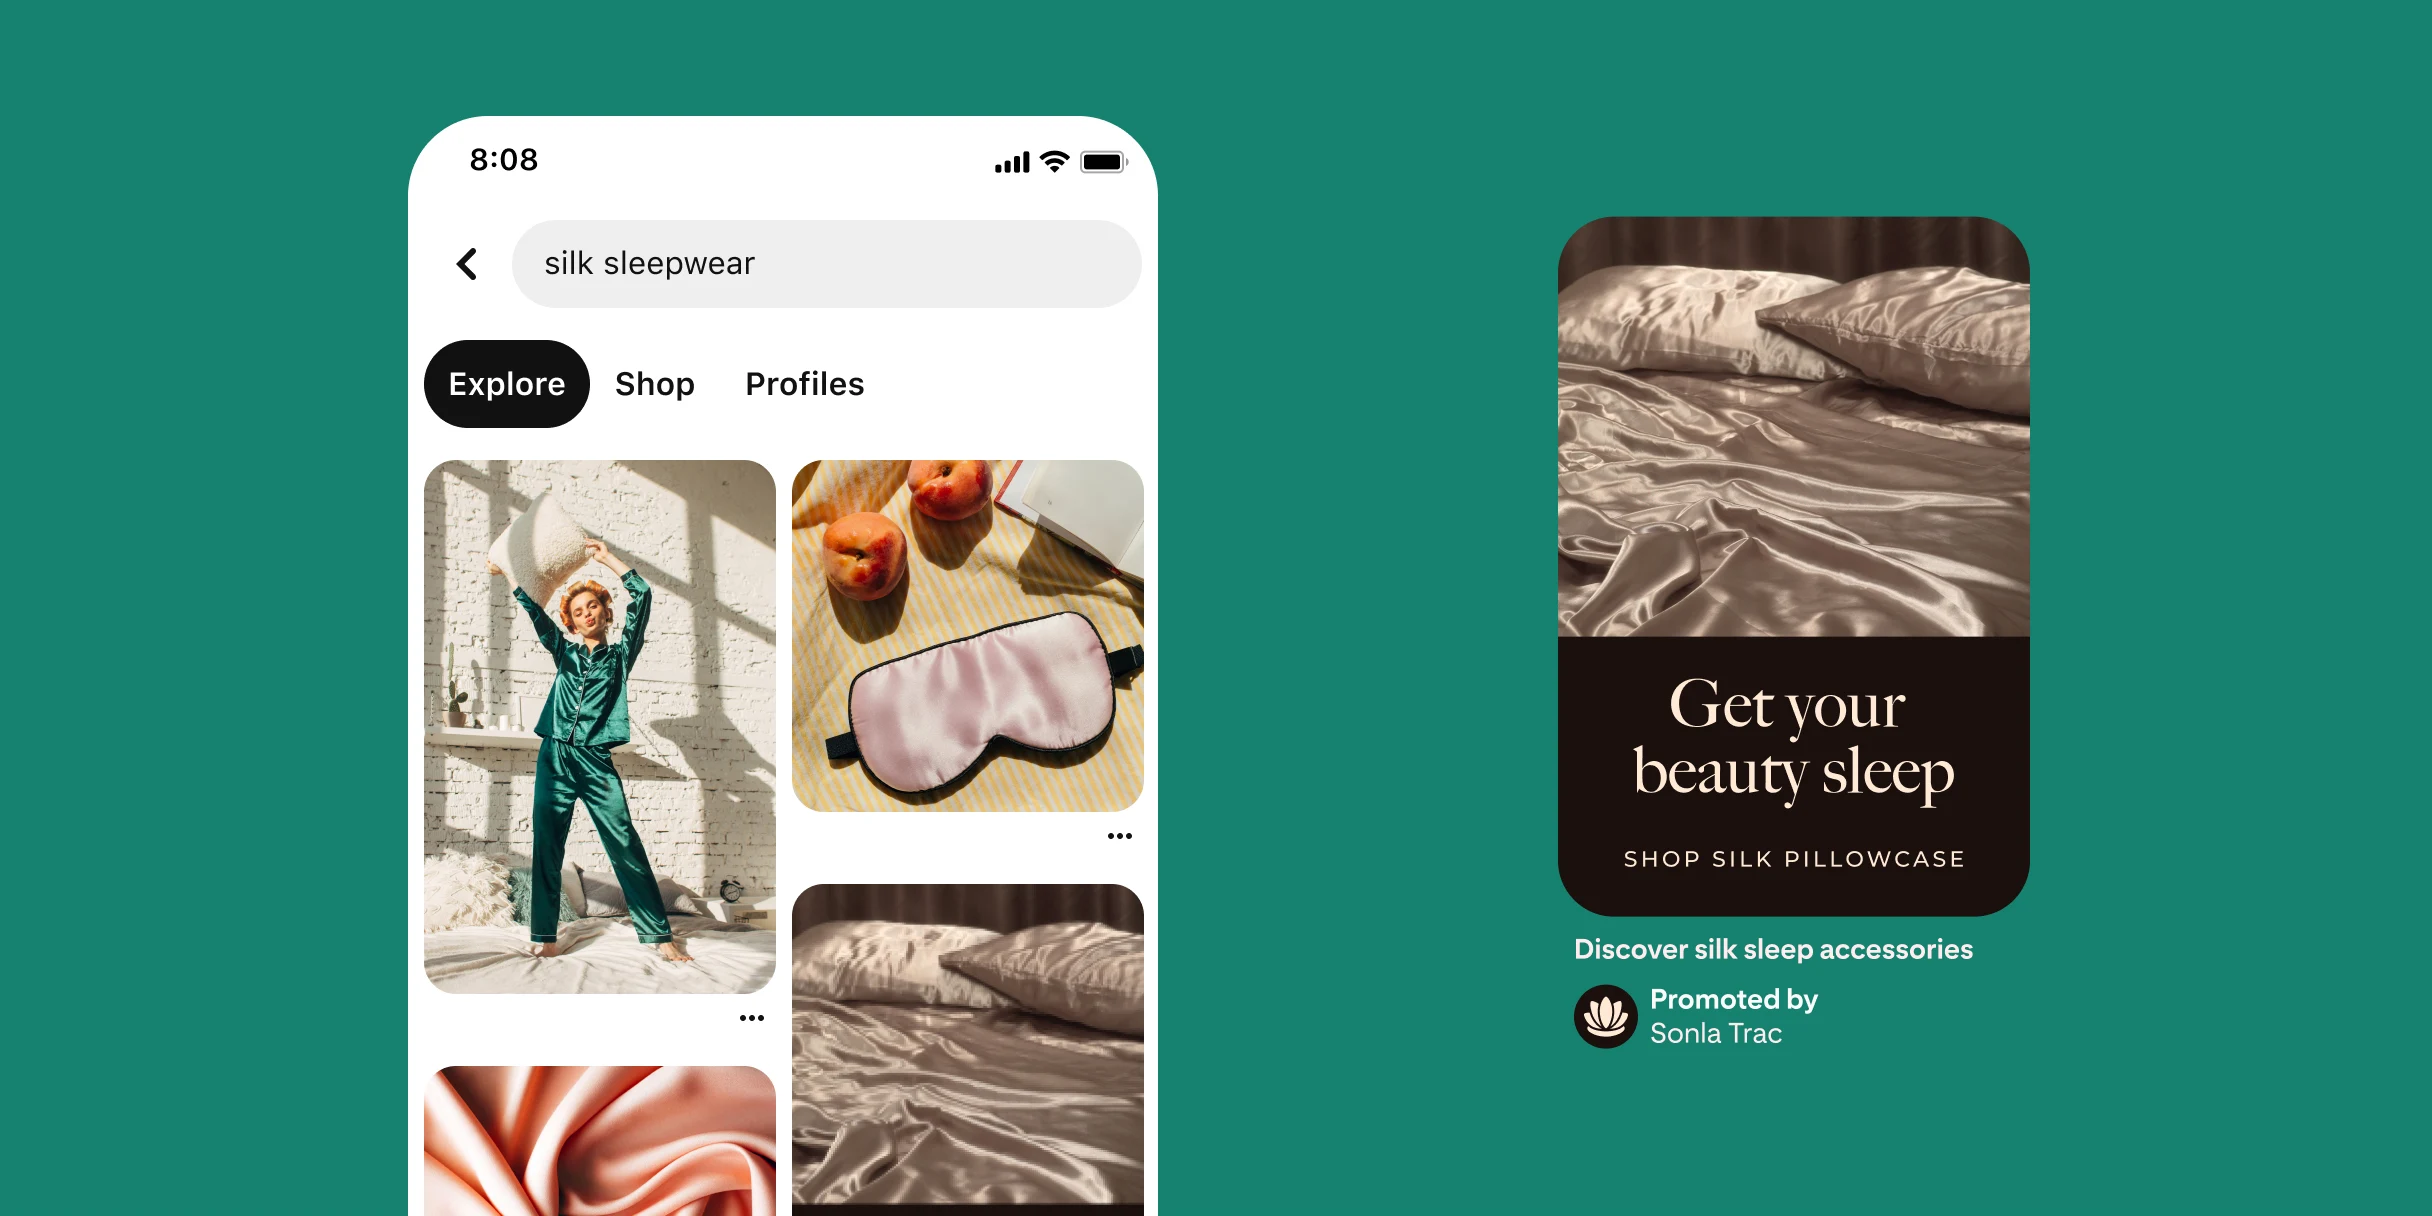 Pinterest search results for silk sleepwear. A white woman in green silk pyjamas, a white brick wall in the background. A pink sleep mask on a yellow striped mat with two peaches. A swirl of pink silk. A Pin of golden silk sheets and pillowcases on a bed. The text reads, ‘Get your beauty sleep – Shop silk pillowcase’. The description reads, ‘Discover silk sleep accessories’.